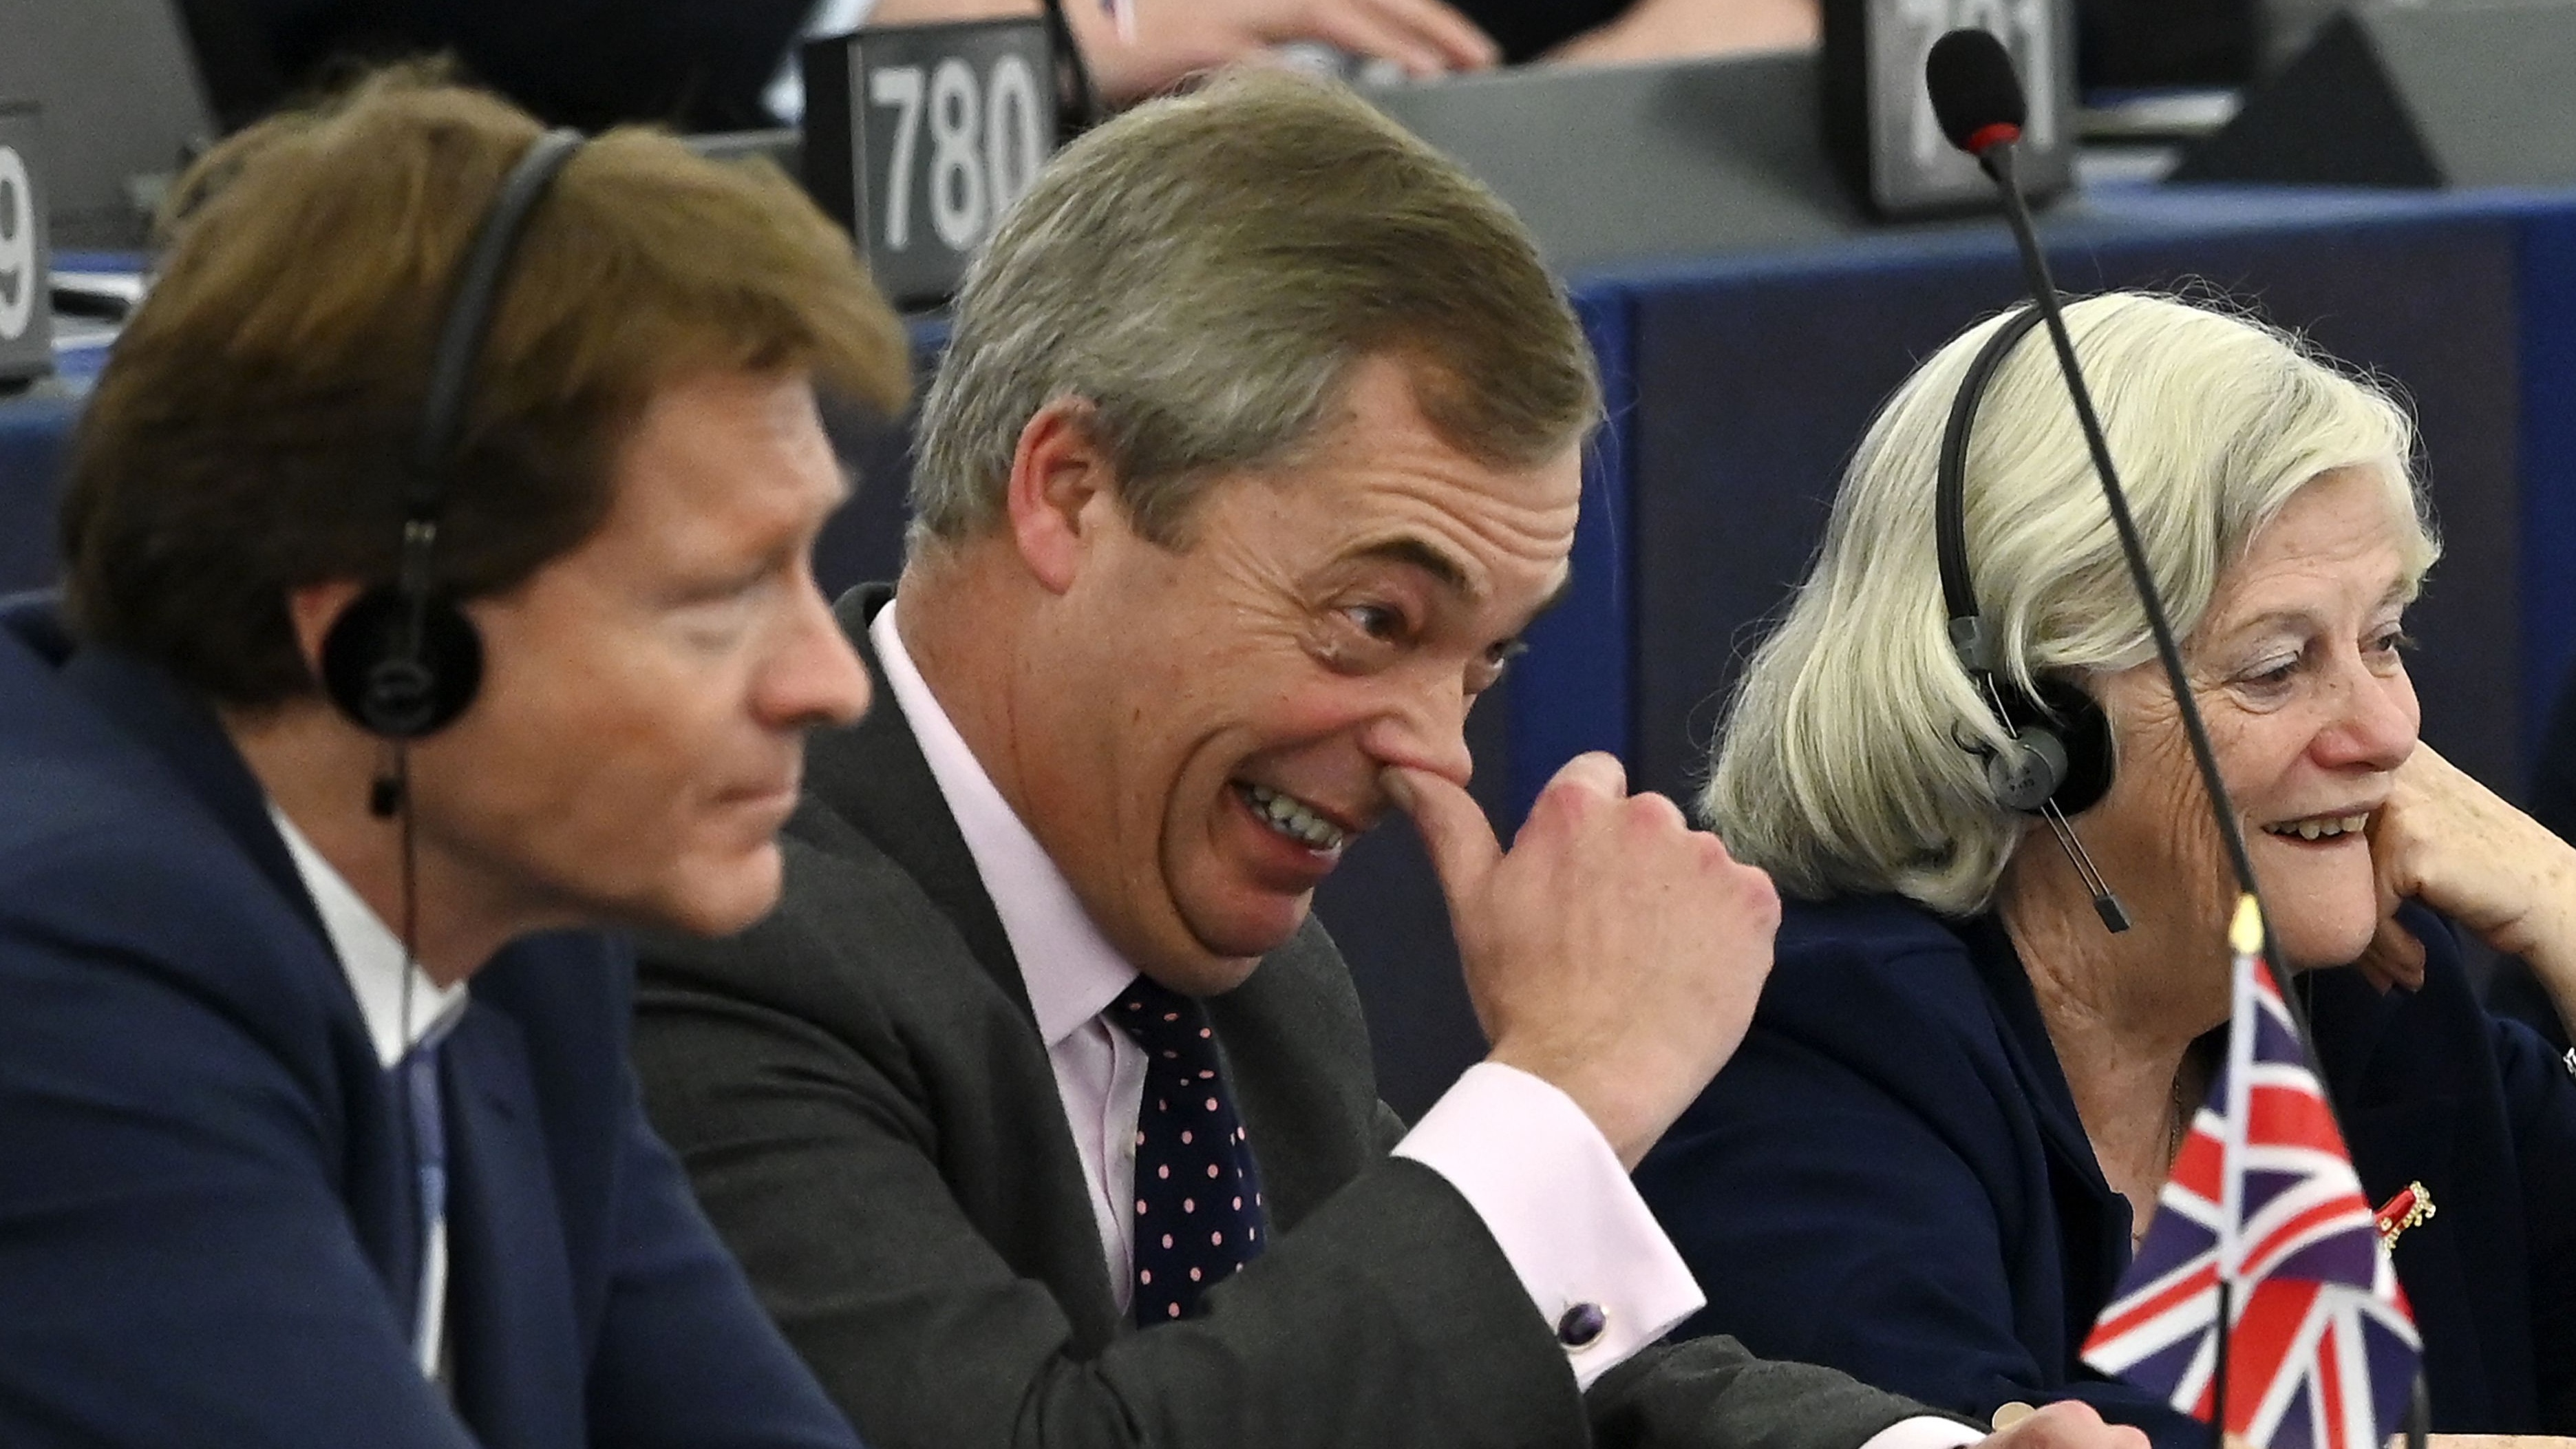 Nigel Farage alongside Brexit Party co-founder Richard Tice and ex-Brexit Party MEP Anne Widdecombe